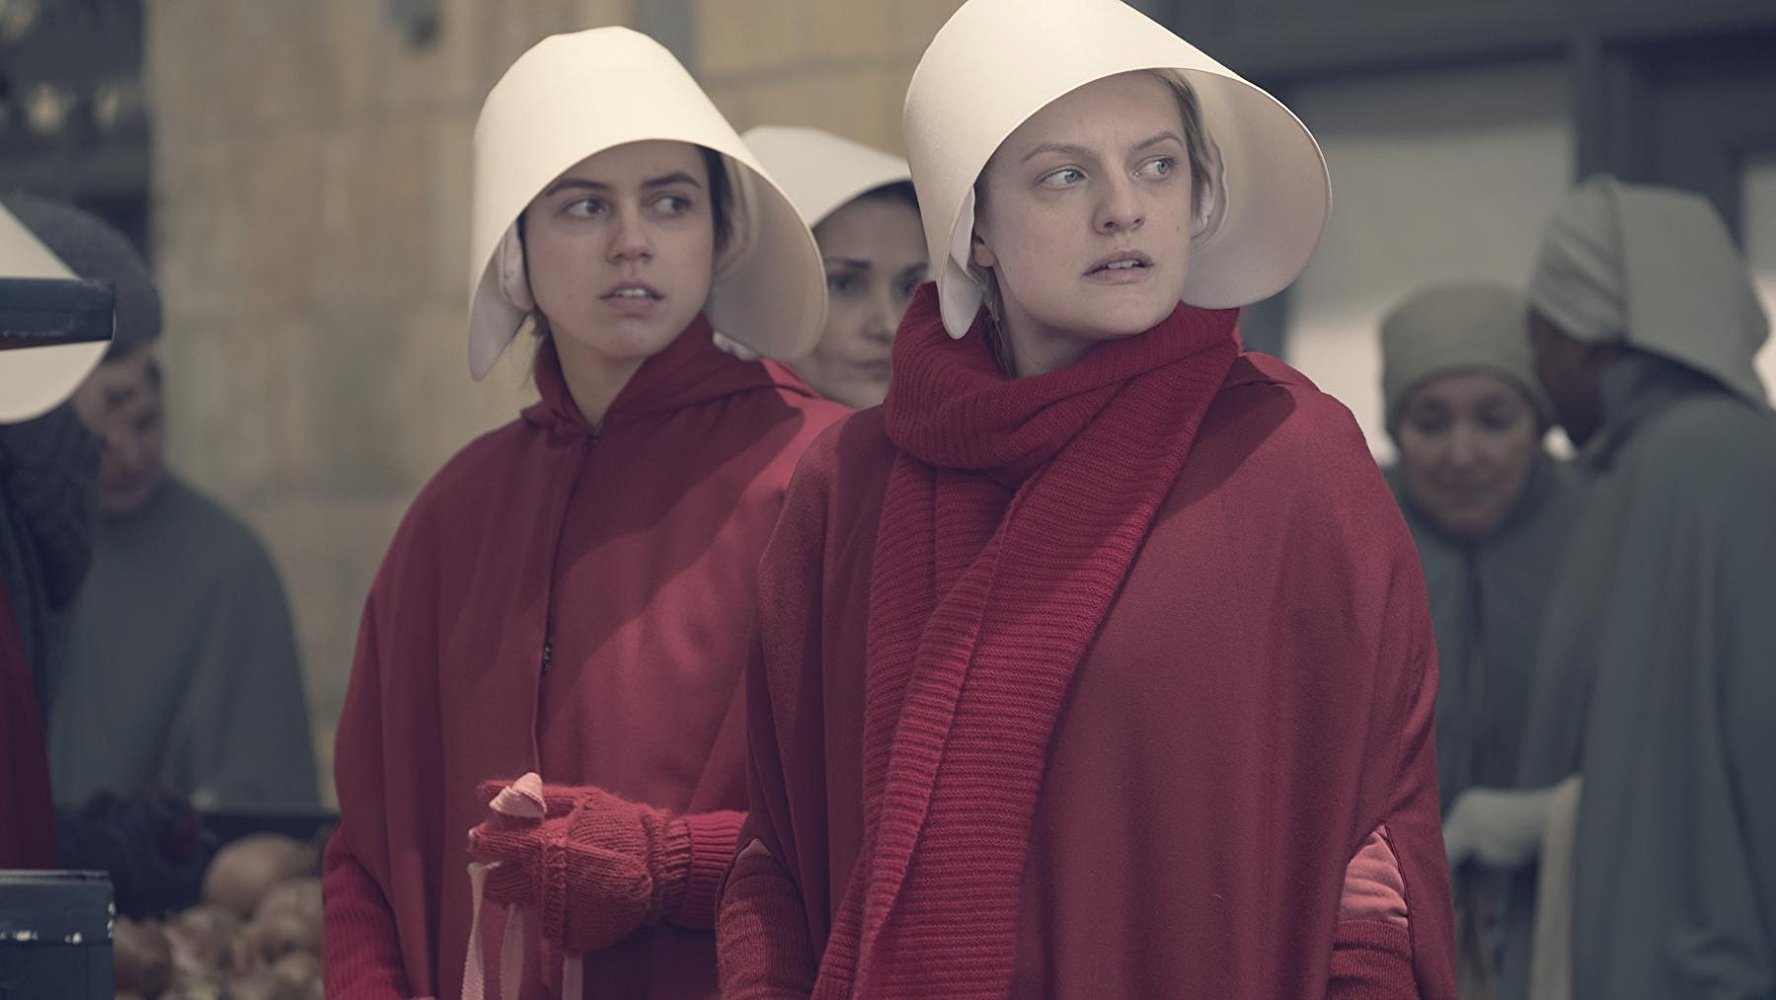 Watch the First Trailer For "The Handmaid's Tale" Season 3 - Where Can I Watch Handmaid's Tale For Free